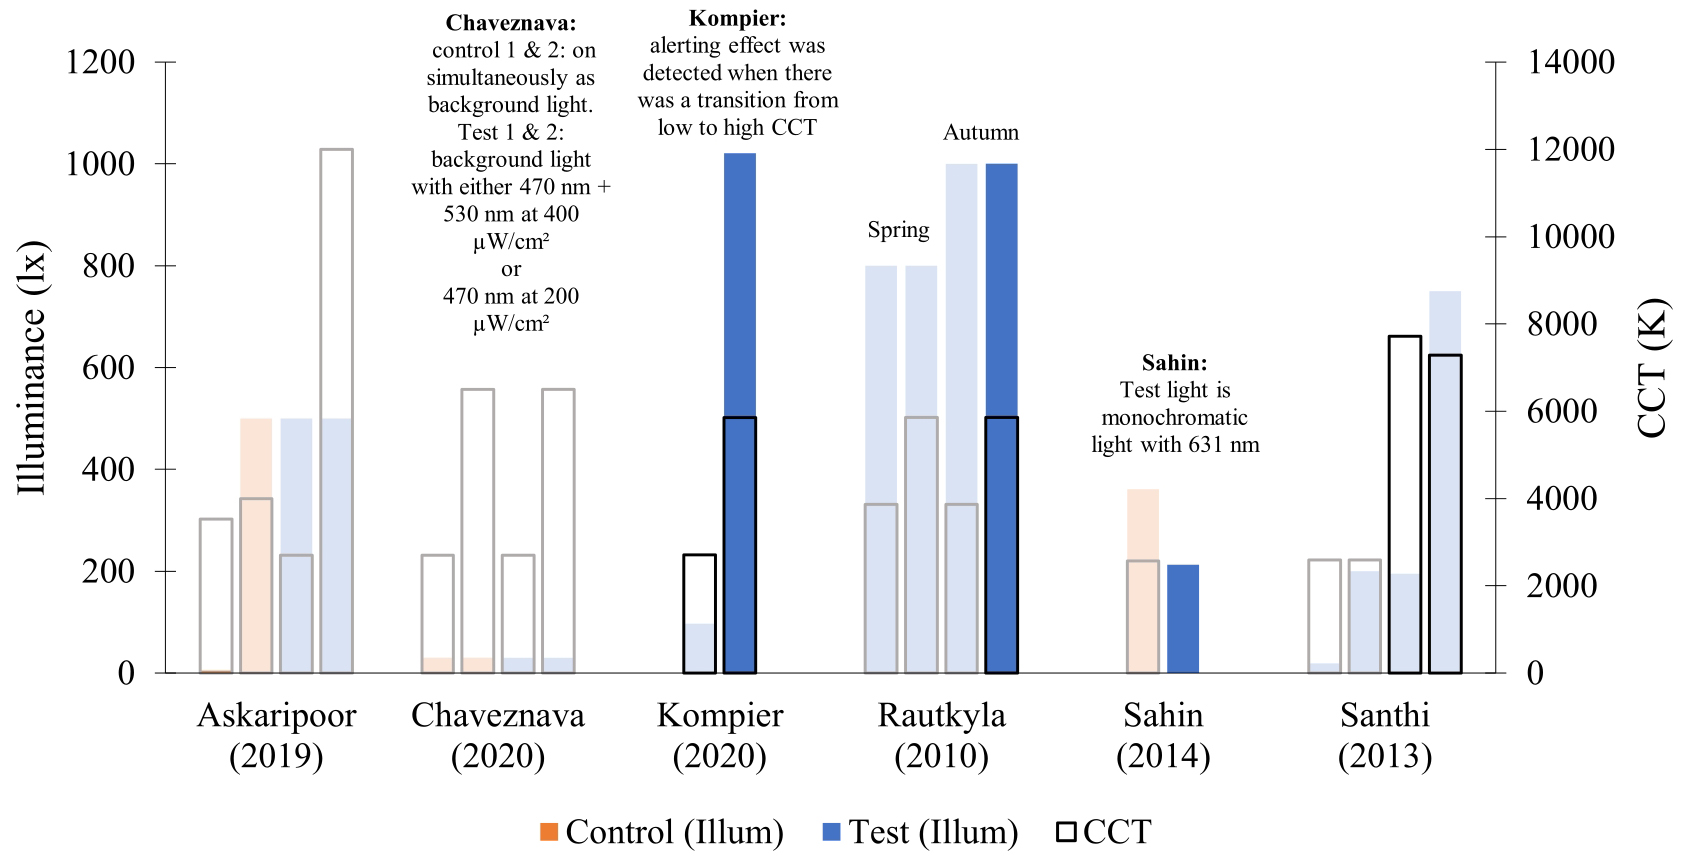 Studies that investigated the effect of CCT on alertness. Opaque bars indicate studies that reported alerting effect (as long as it was not only physiological and the control condition was not a dim light). Studies by Kompier et al. [56], Rautkyla et al. [45] and Santhi et al. [58] compare different scenarios in relation to each other, not to control light.